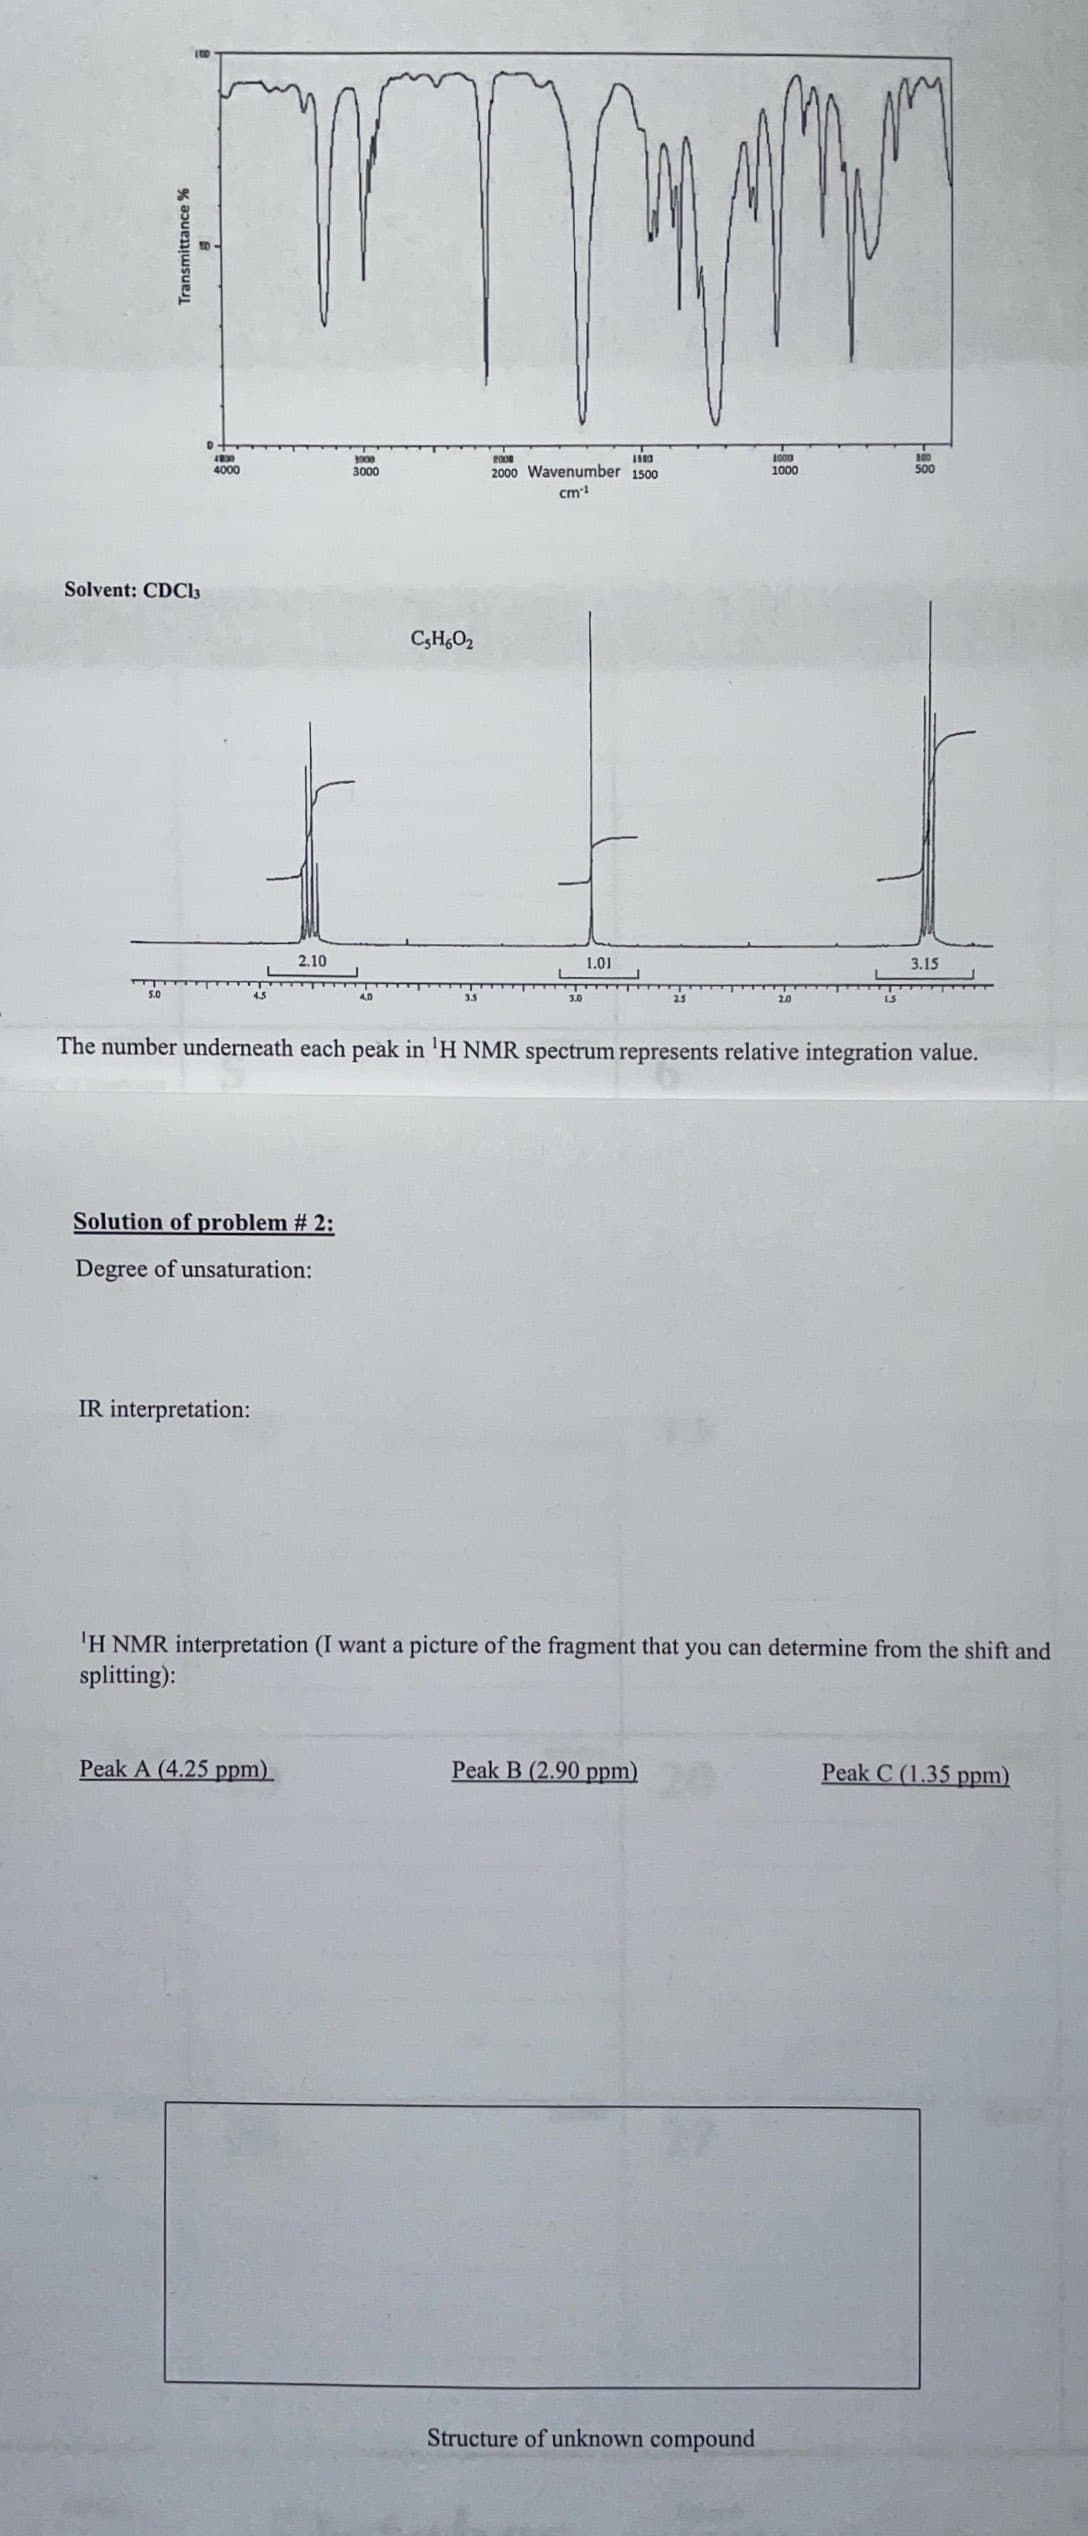 FAY
Solvent: CDC13
D
4830
4000
2.10
Solution of problem # 2:
Degree of unsaturation:
IR interpretation:
3000
3000
Peak A (4.25 ppm)
4,0
C5H602
POOR
1983
2000 Wavenumber 1500
cm 1
3.0
1.01
2.5
The number underneath each peak in 'H NMR spectrum represents relative integration value.
Peak B (2.90 ppm)
1000
1000
800
500
'H NMR interpretation (I want a picture of the fragment that you can determine from the shift and
splitting):
Structure of unknown compound
3.15
Peak C (1.35 ppm)